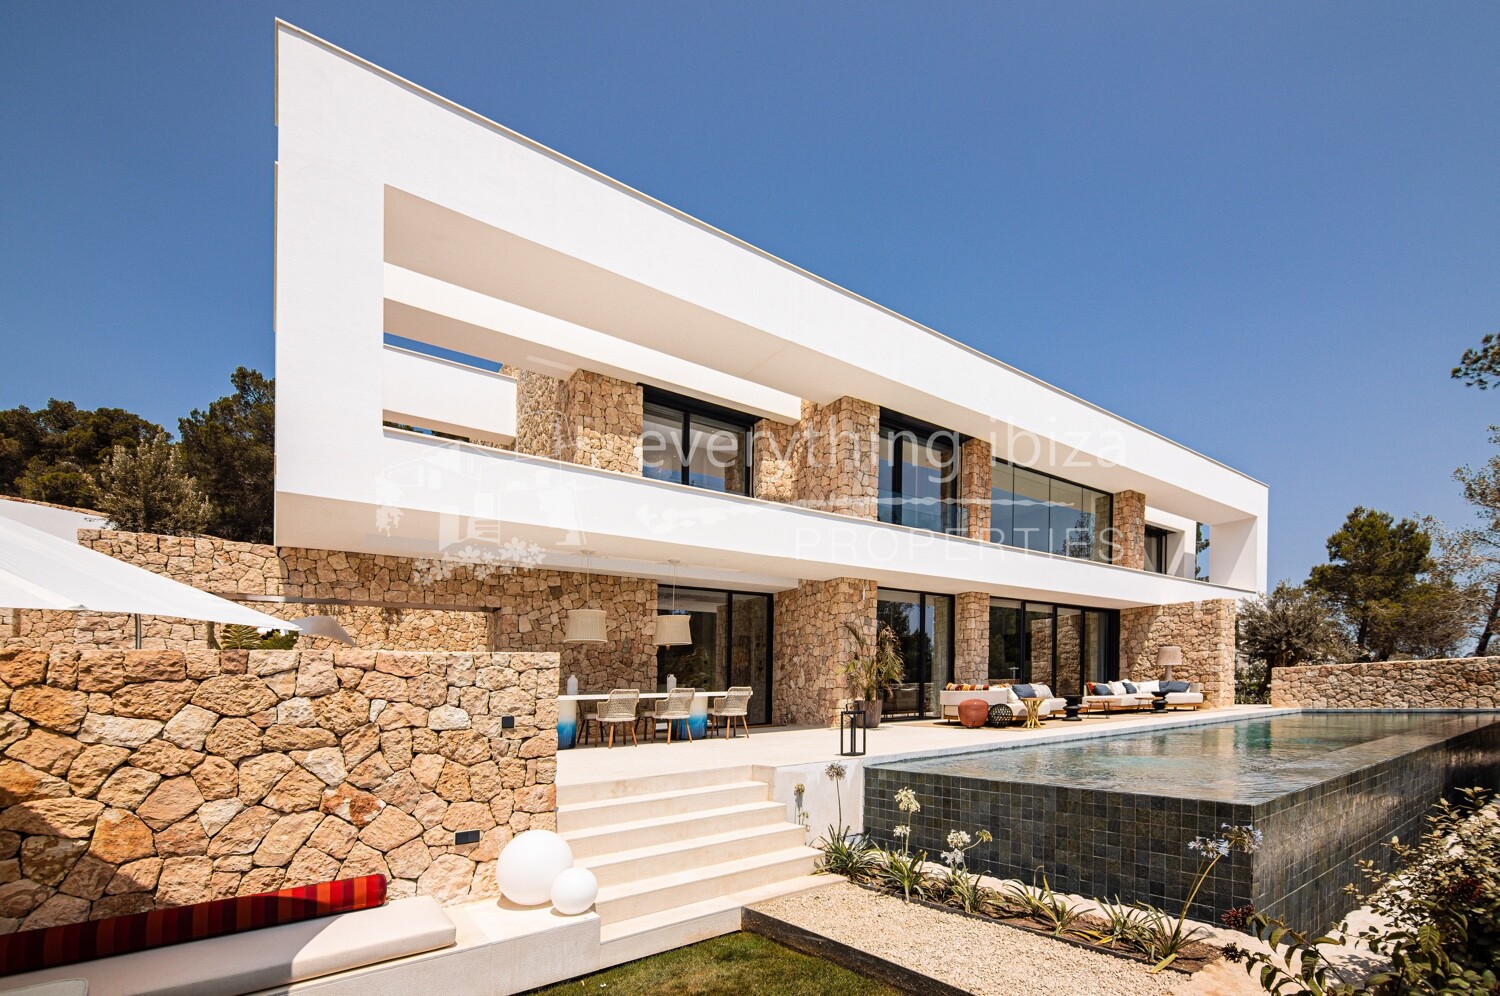 Luxury Minimalistic New Build Villas Located at Roca Llisa, ref. 1613, for sale in Ibiza by everything ibiza Properties